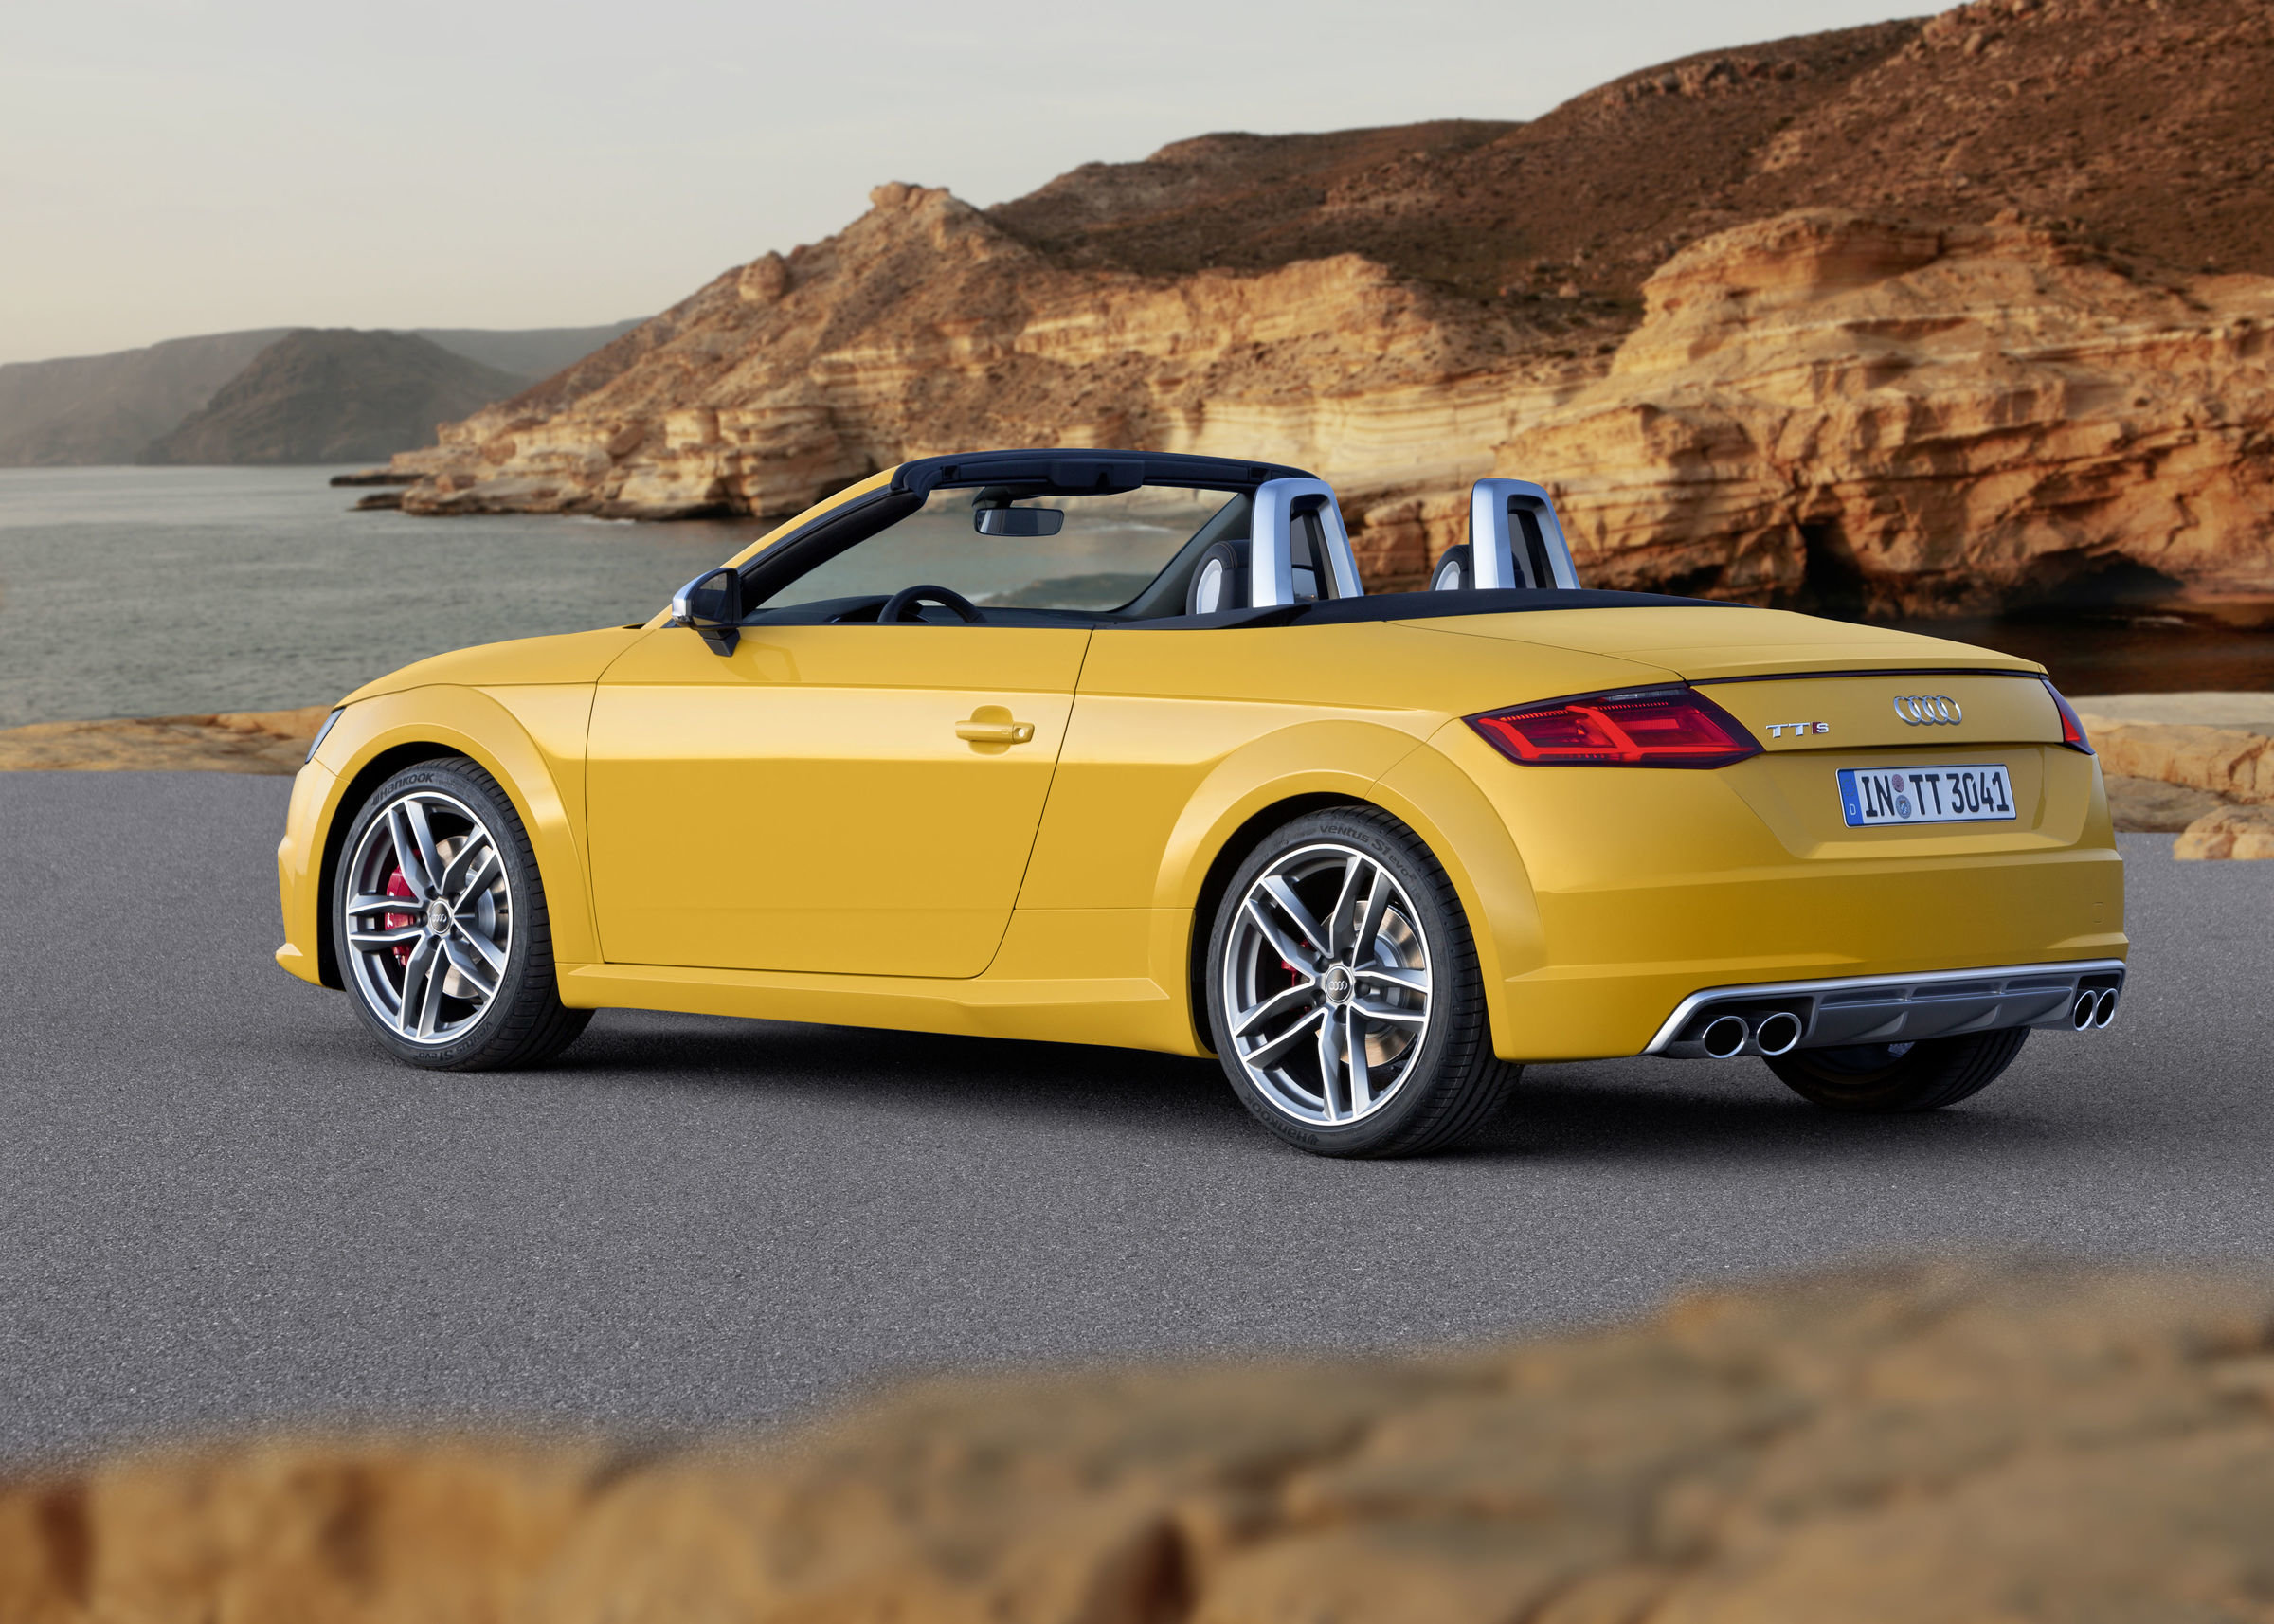 More information about "Audi TT coupe"